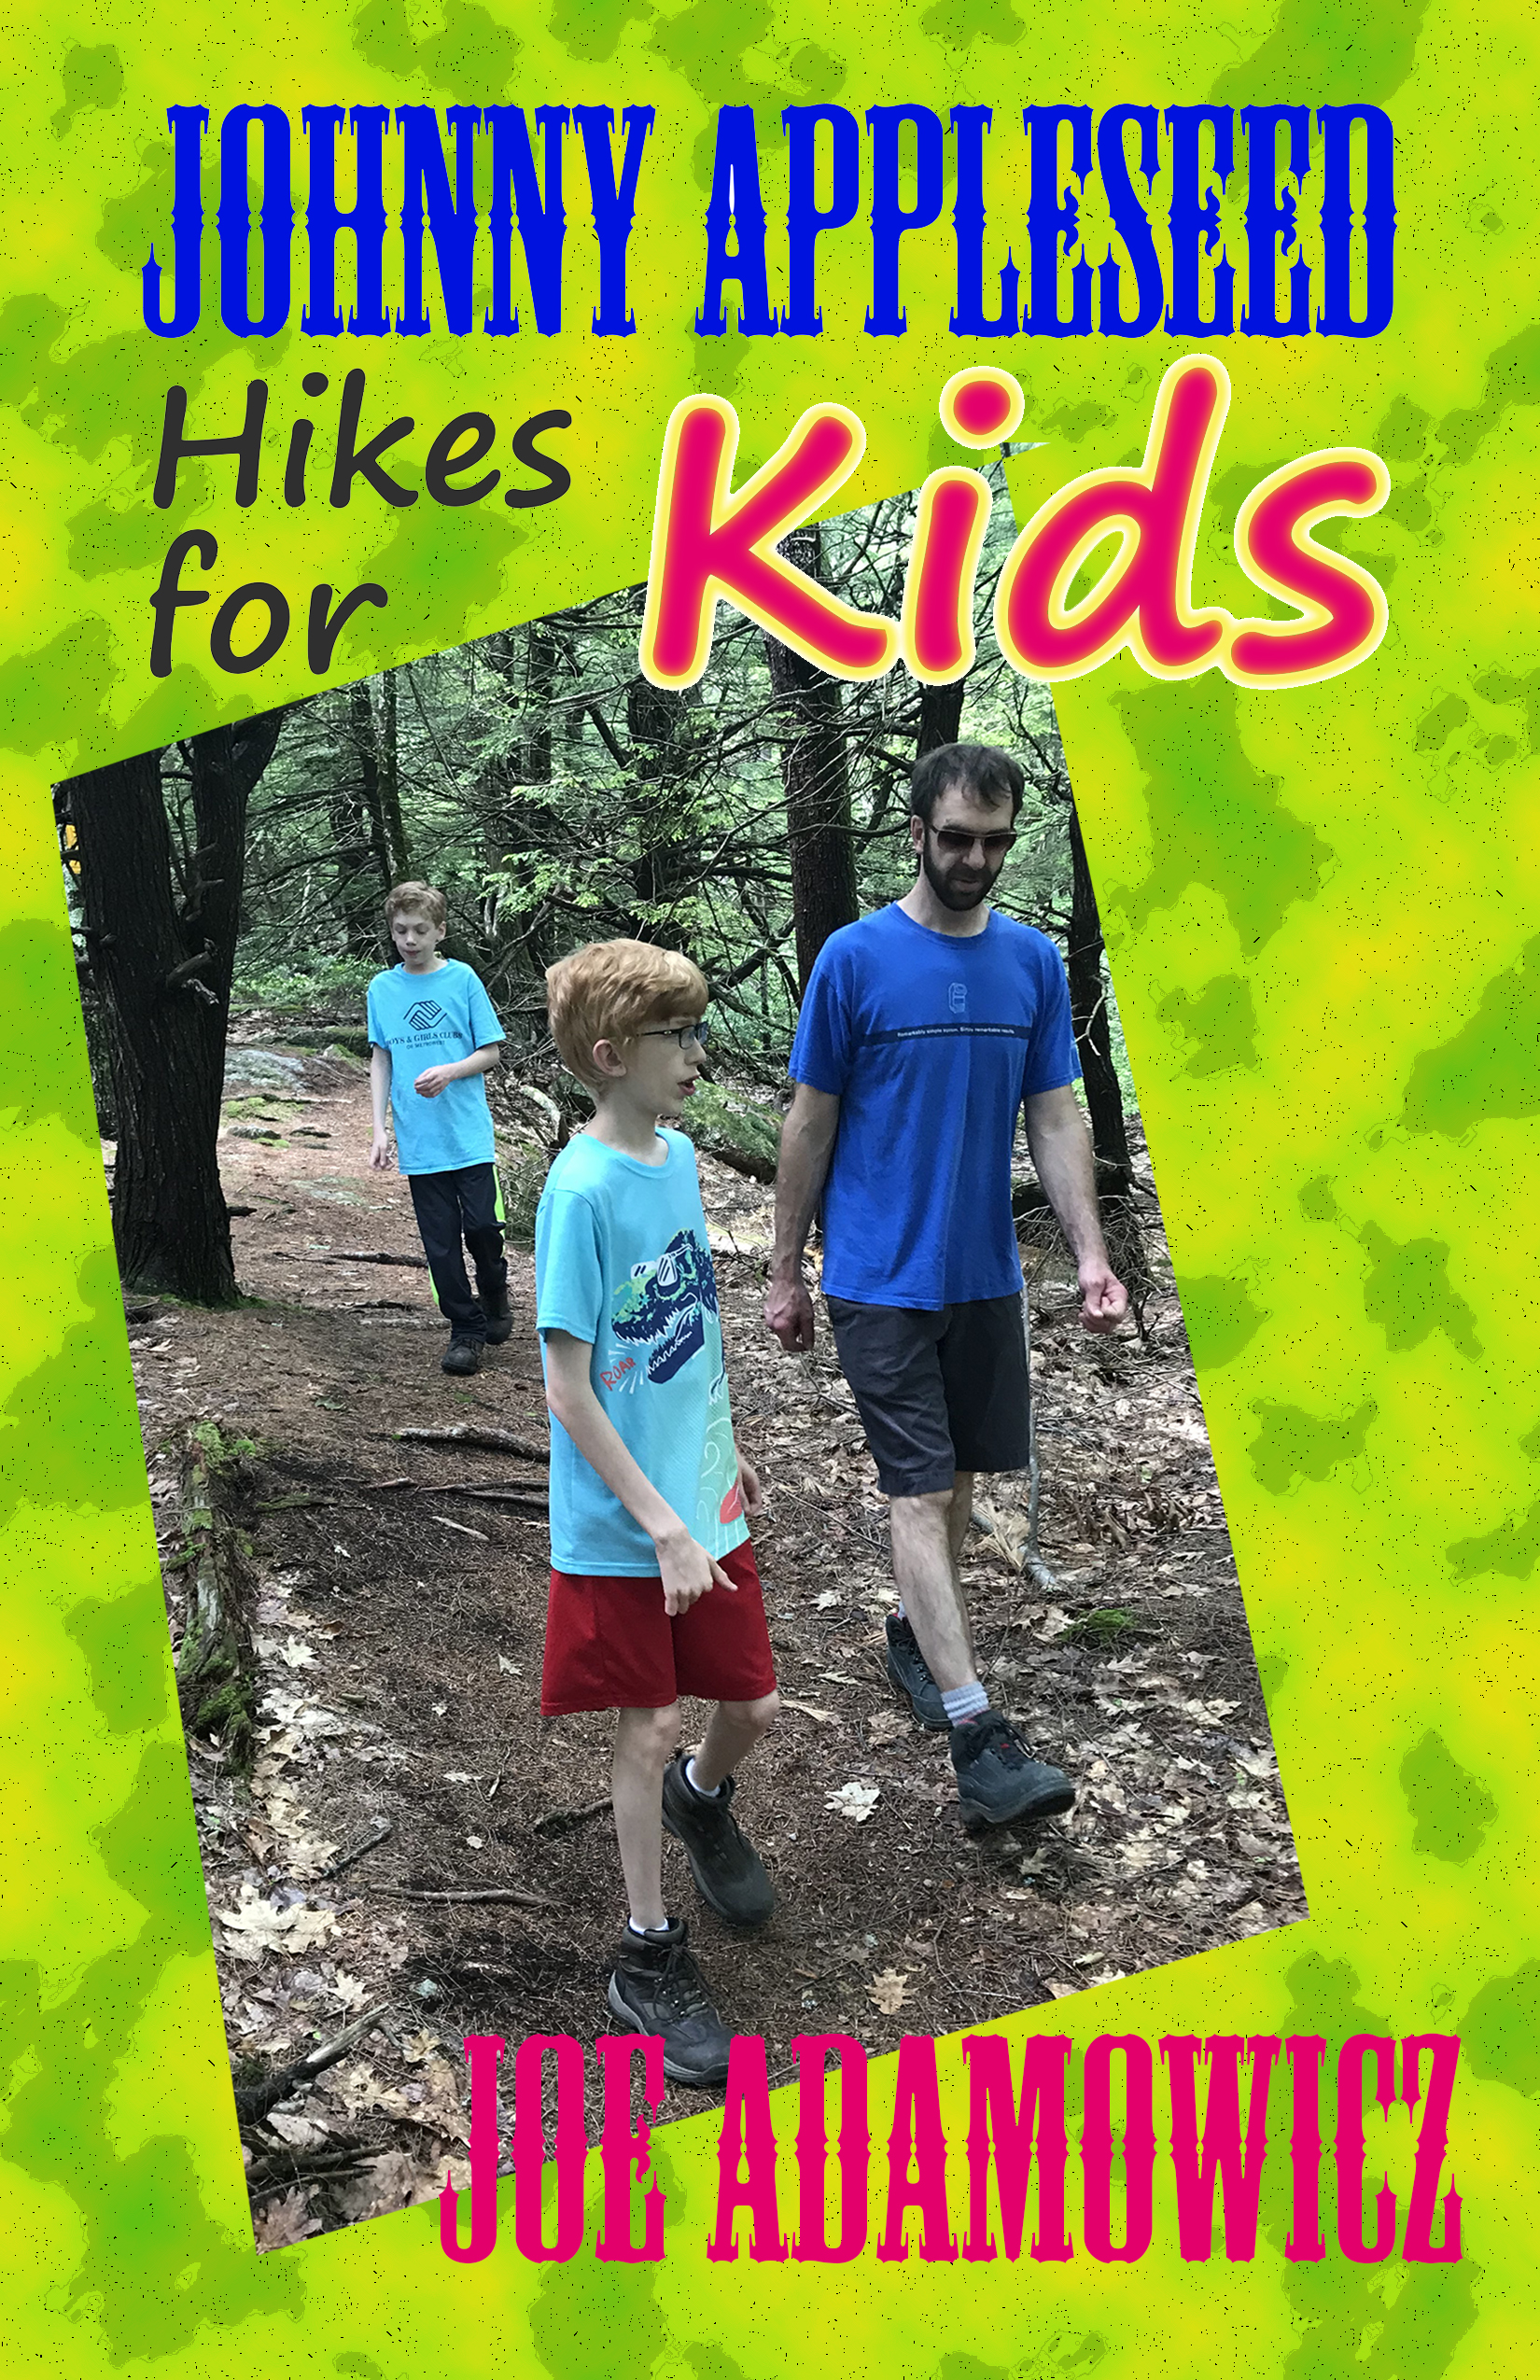 Johnny Appleseed Hikes Book Cover